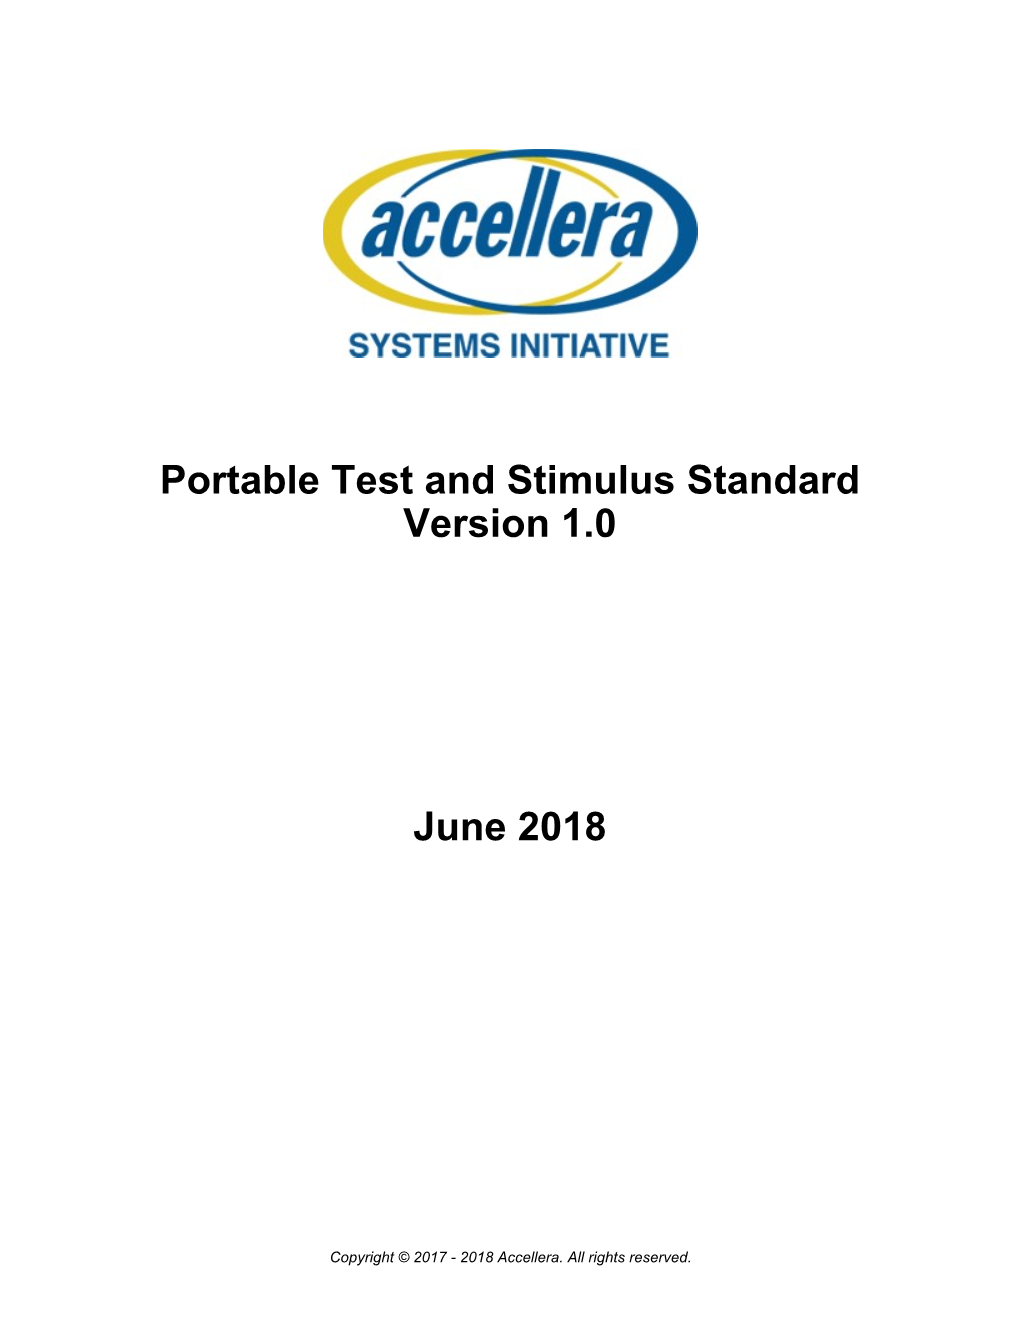 Portable Test and Stimulus Standard Version 1.0